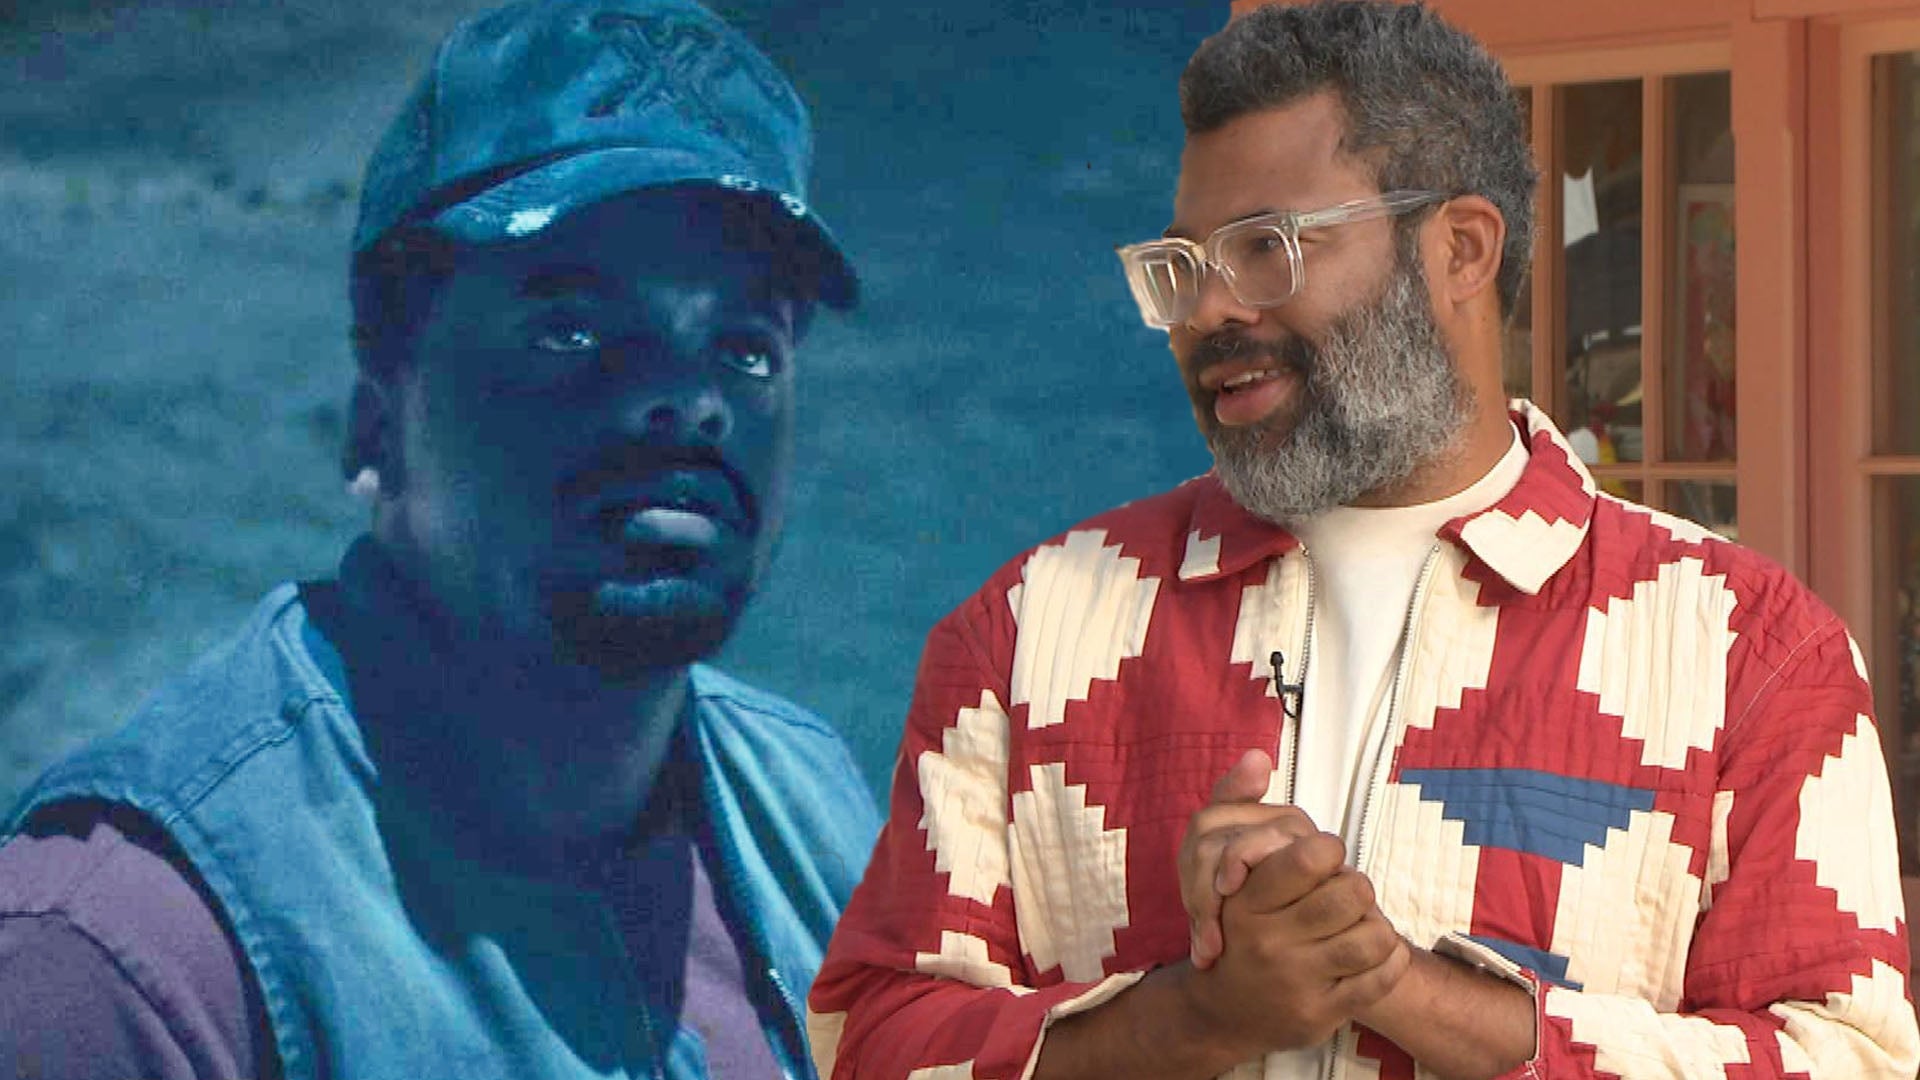 Jordan Peele Gushes About ‘Nope’ Star Daniel Kaluuya and Why He’s His Favorite Actor (Exclusive)